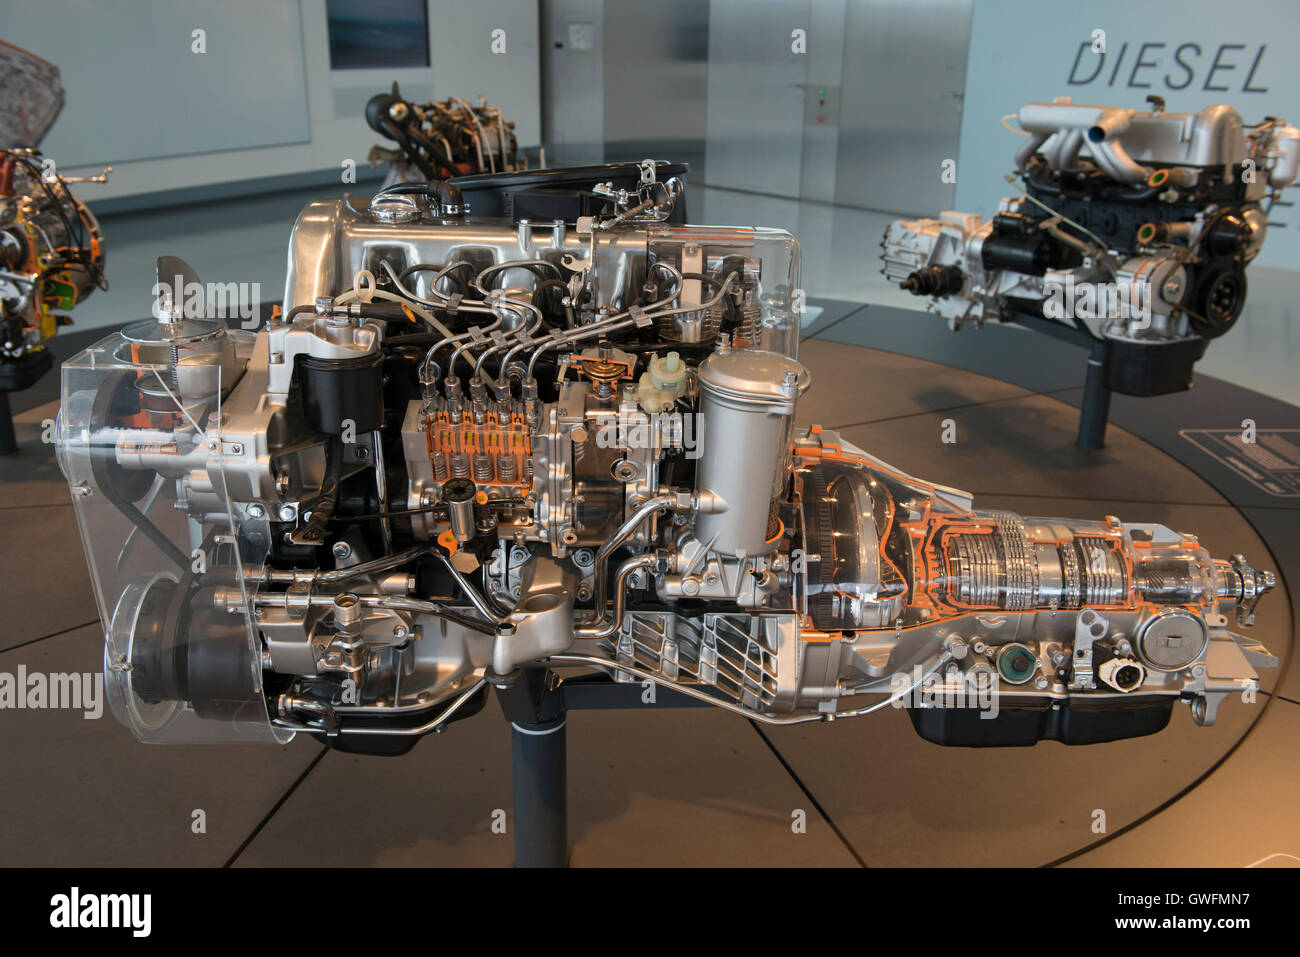 1980 Diesel engine, cut-away model, with automatic transmission and turbocharger, Mercedes-Museum, Stuttgart, Germany Stock Photo